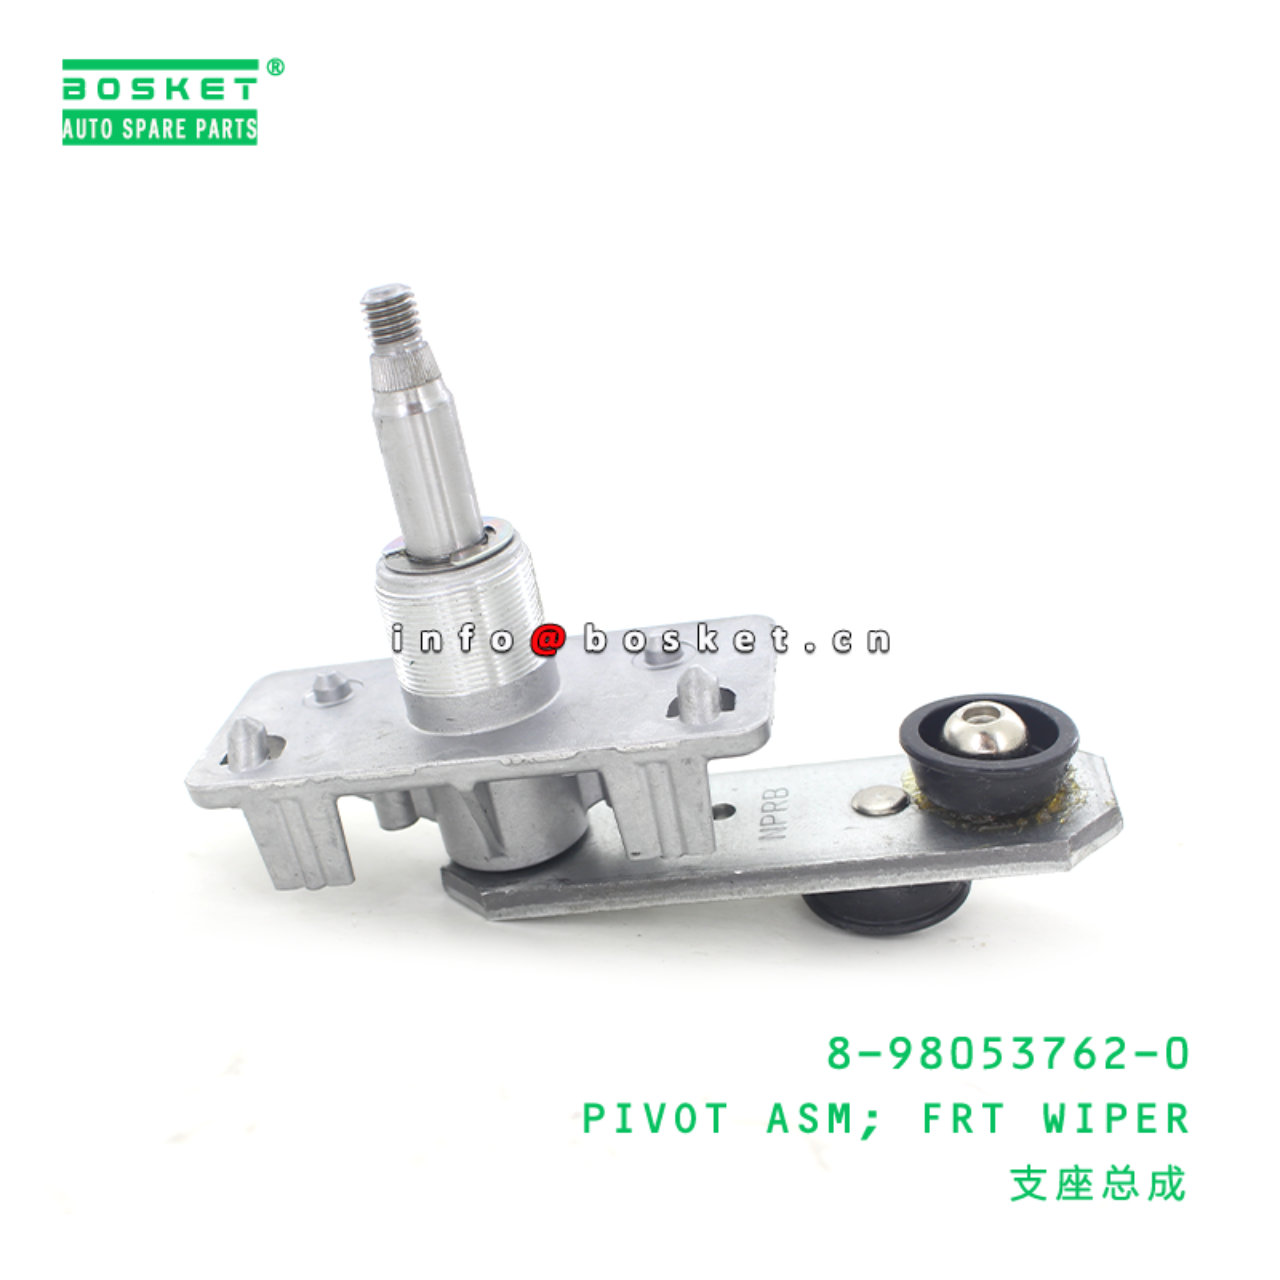 8-98053762-0 Front Wiper Pivot Assembly 8980537620 Suitable for ISUZU NPR